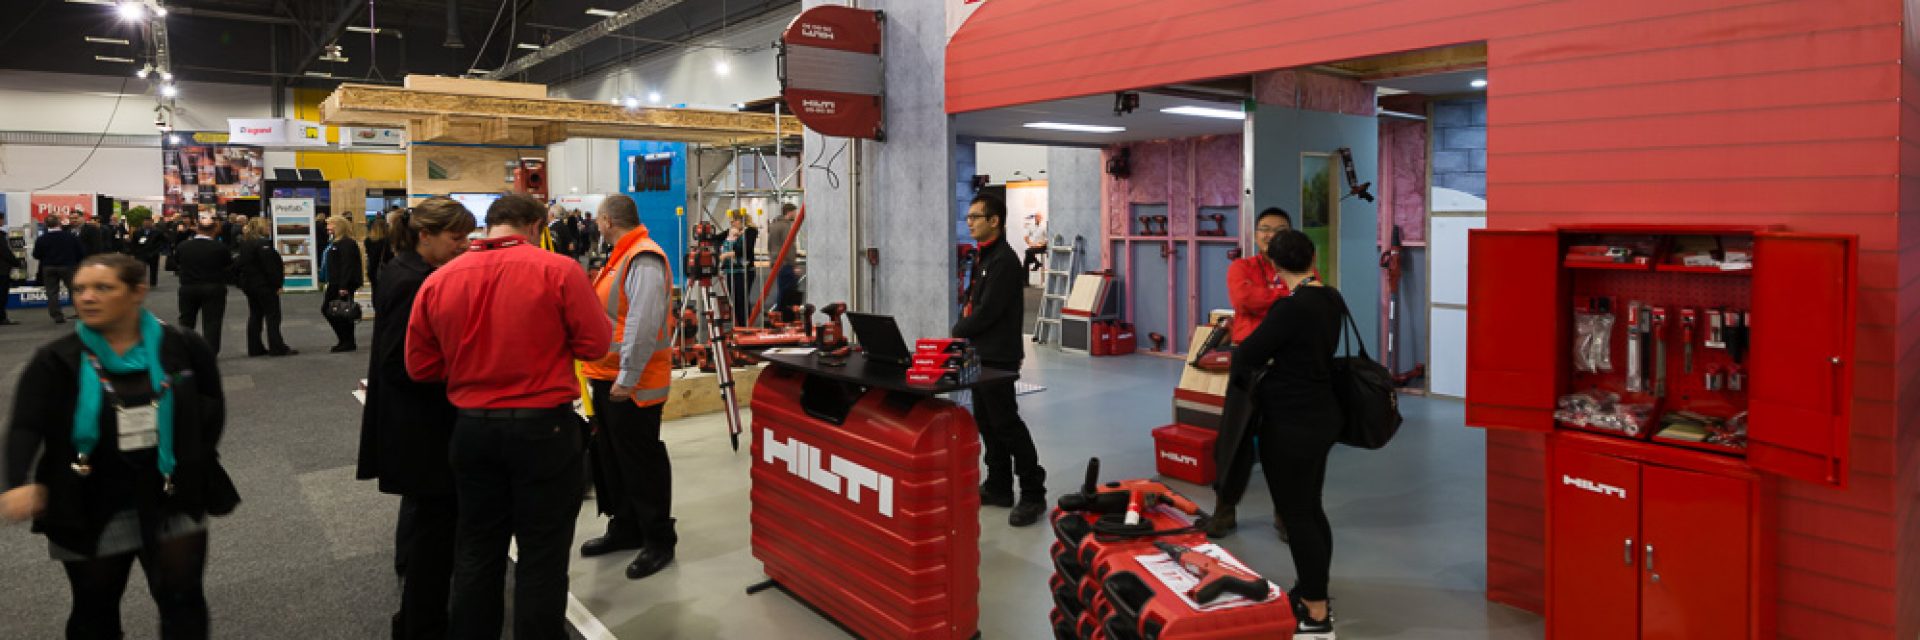 Hilti stand at Buildnz